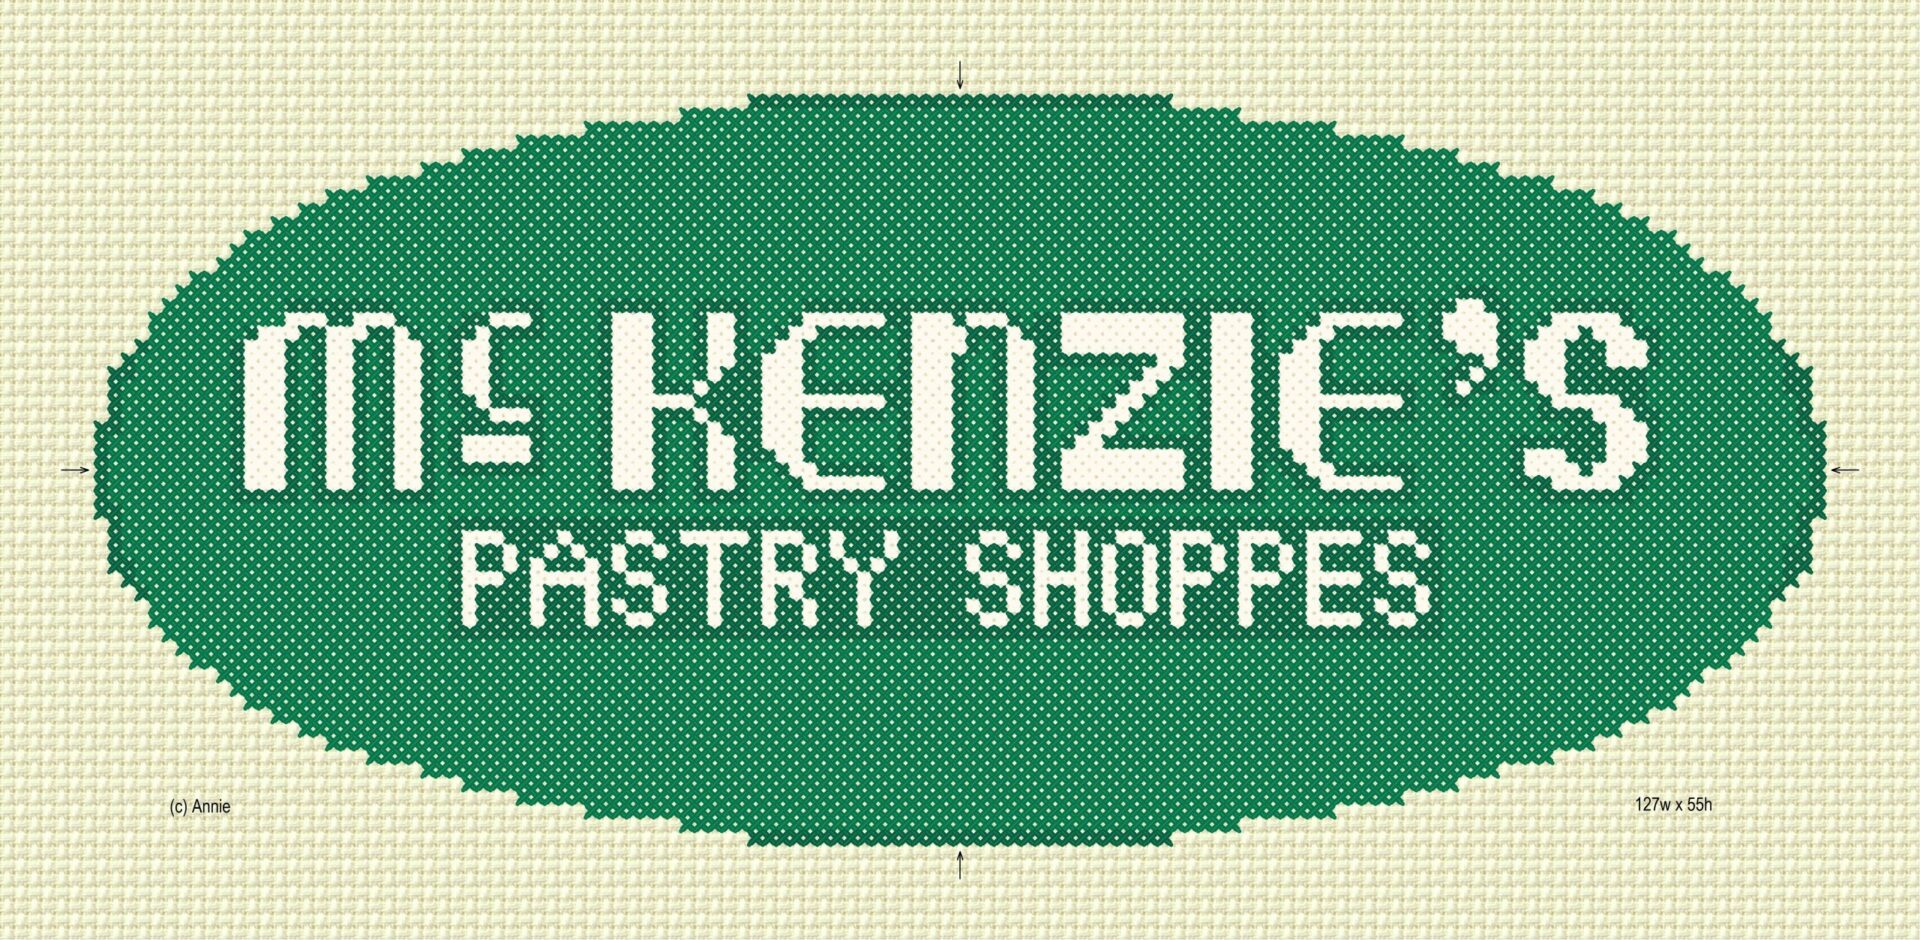 The Mc Kenzies Pastry Shoppes